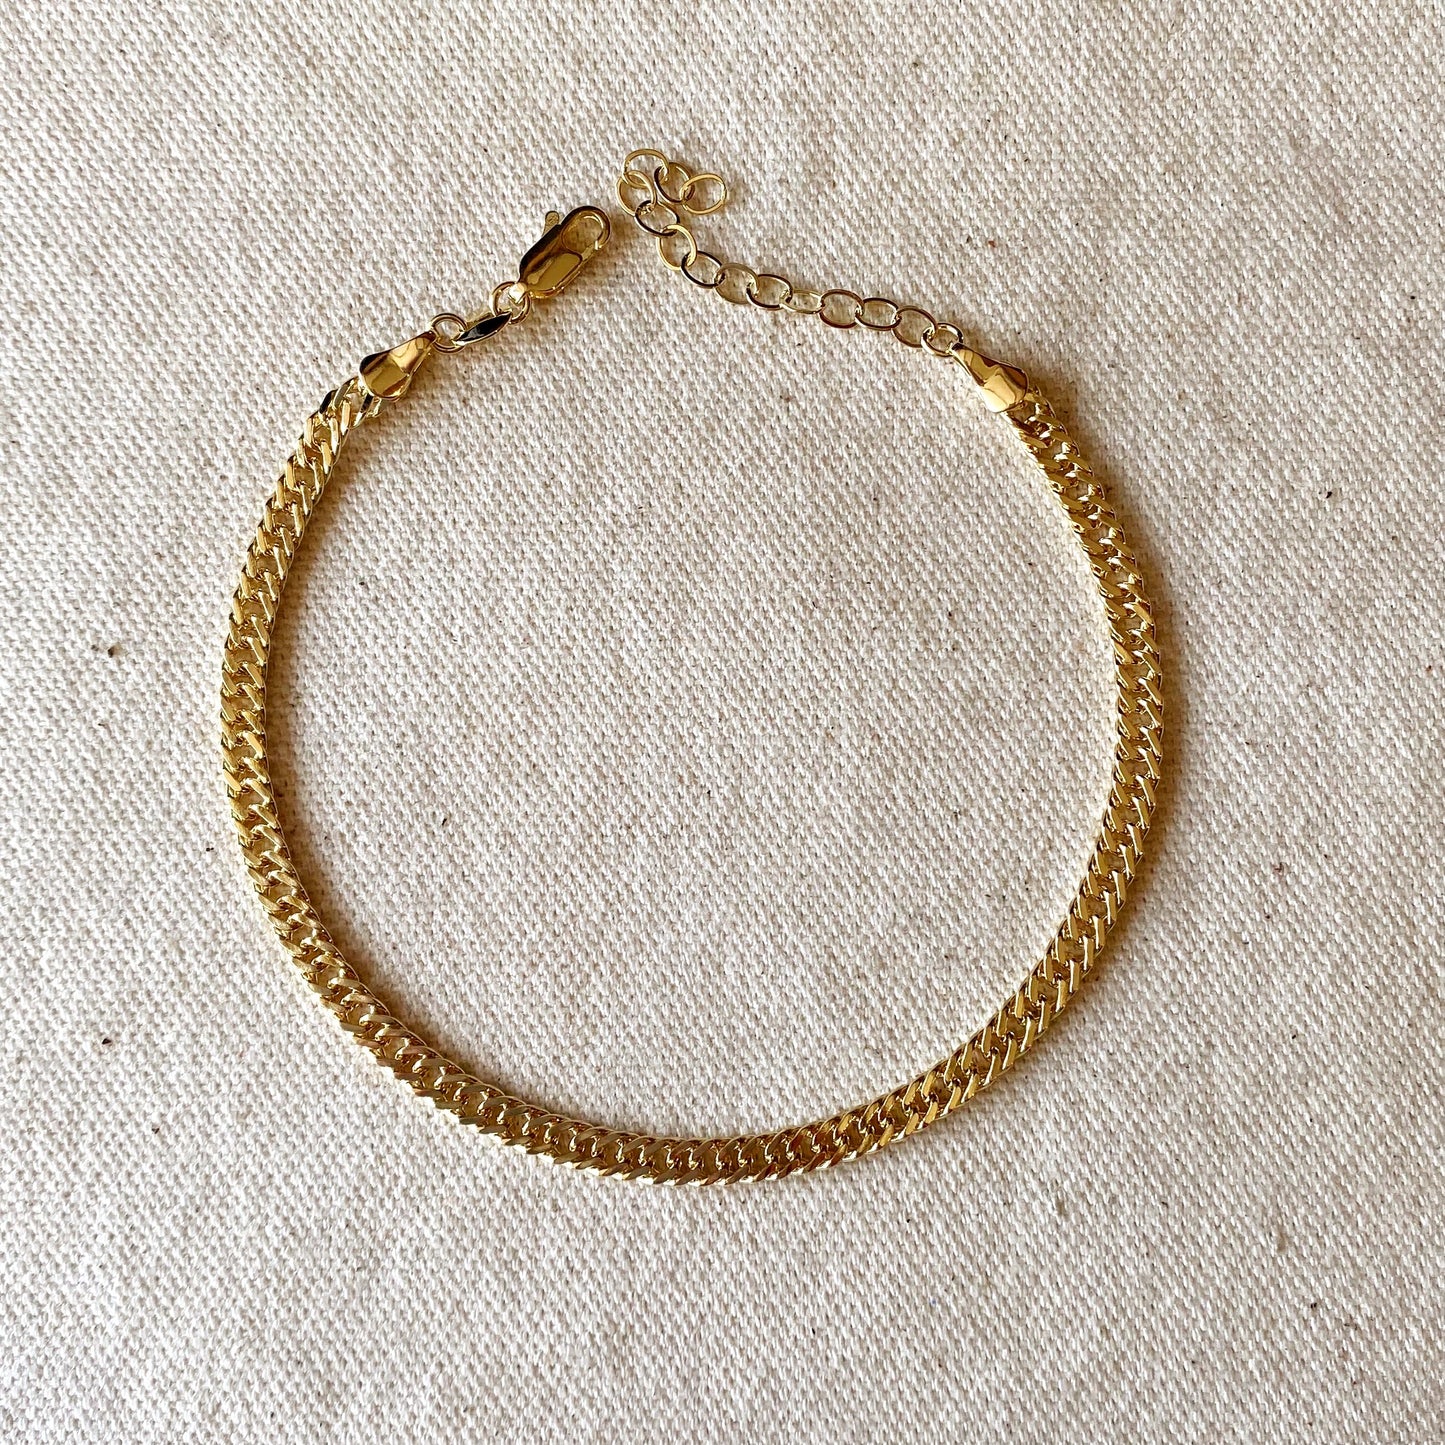 18k Gold Filled Double Cuban Link or Curb Chain 4.0mm Thickness Anklet